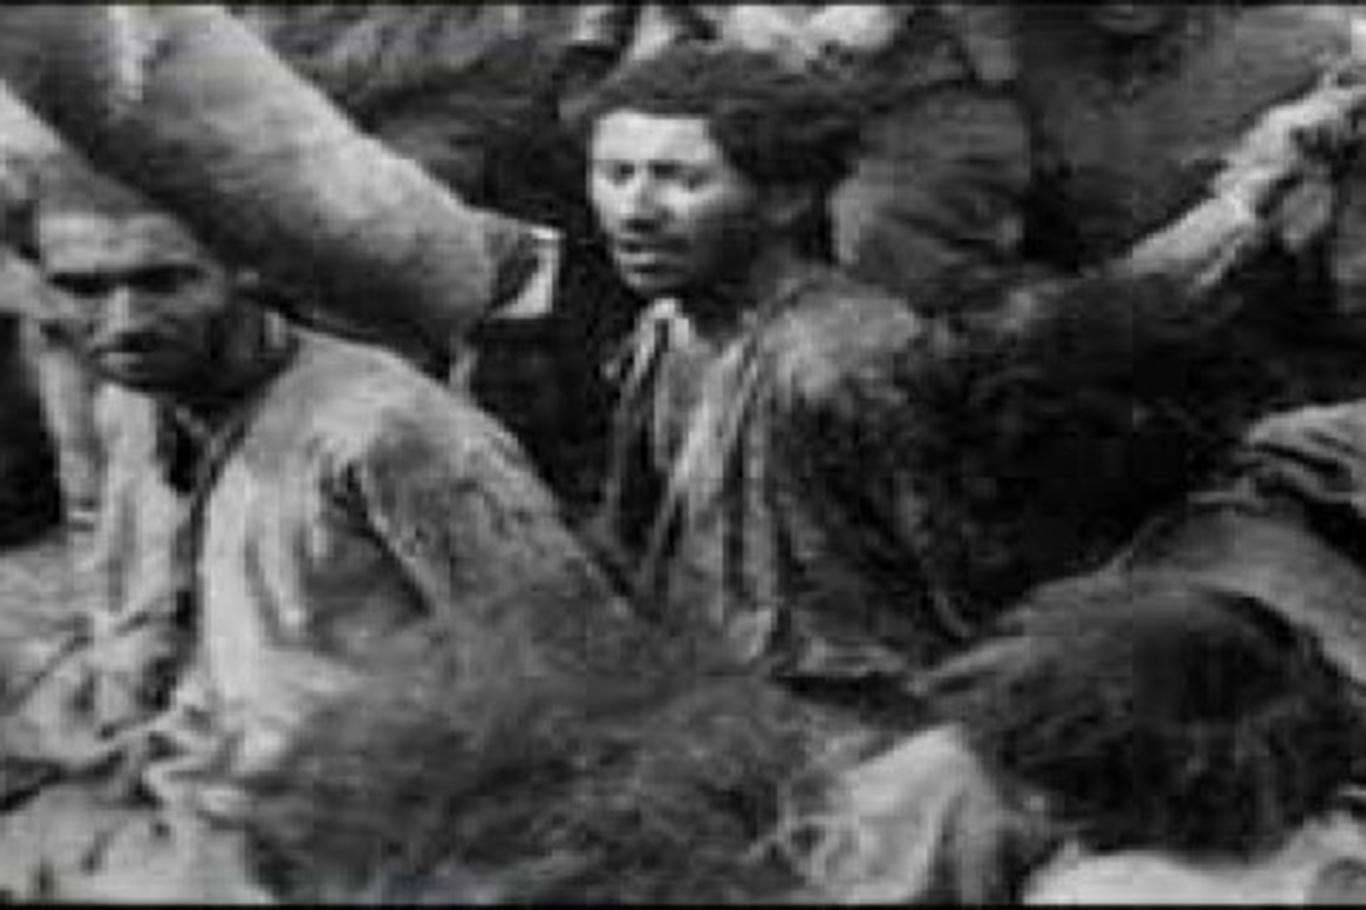 Today marks the 91st anniversary of the Zilan Massacre